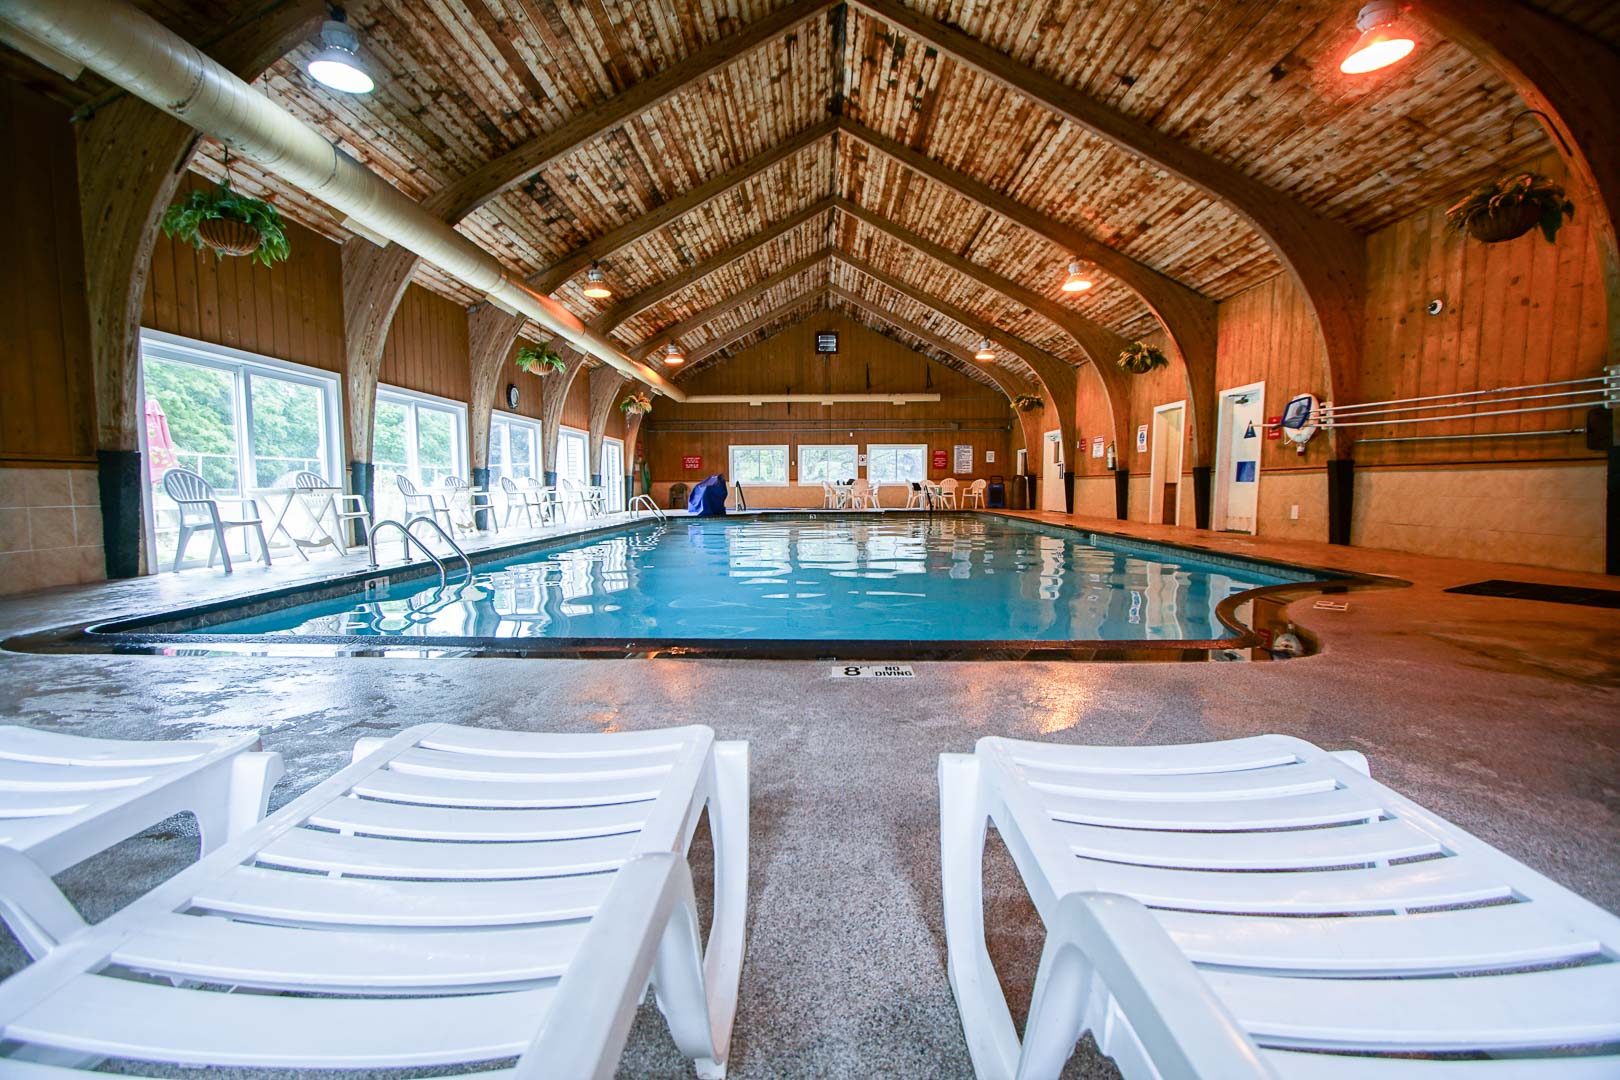 An all year round indoor swimming pool at VRI's Brewster Green Resort in Massachusetts.